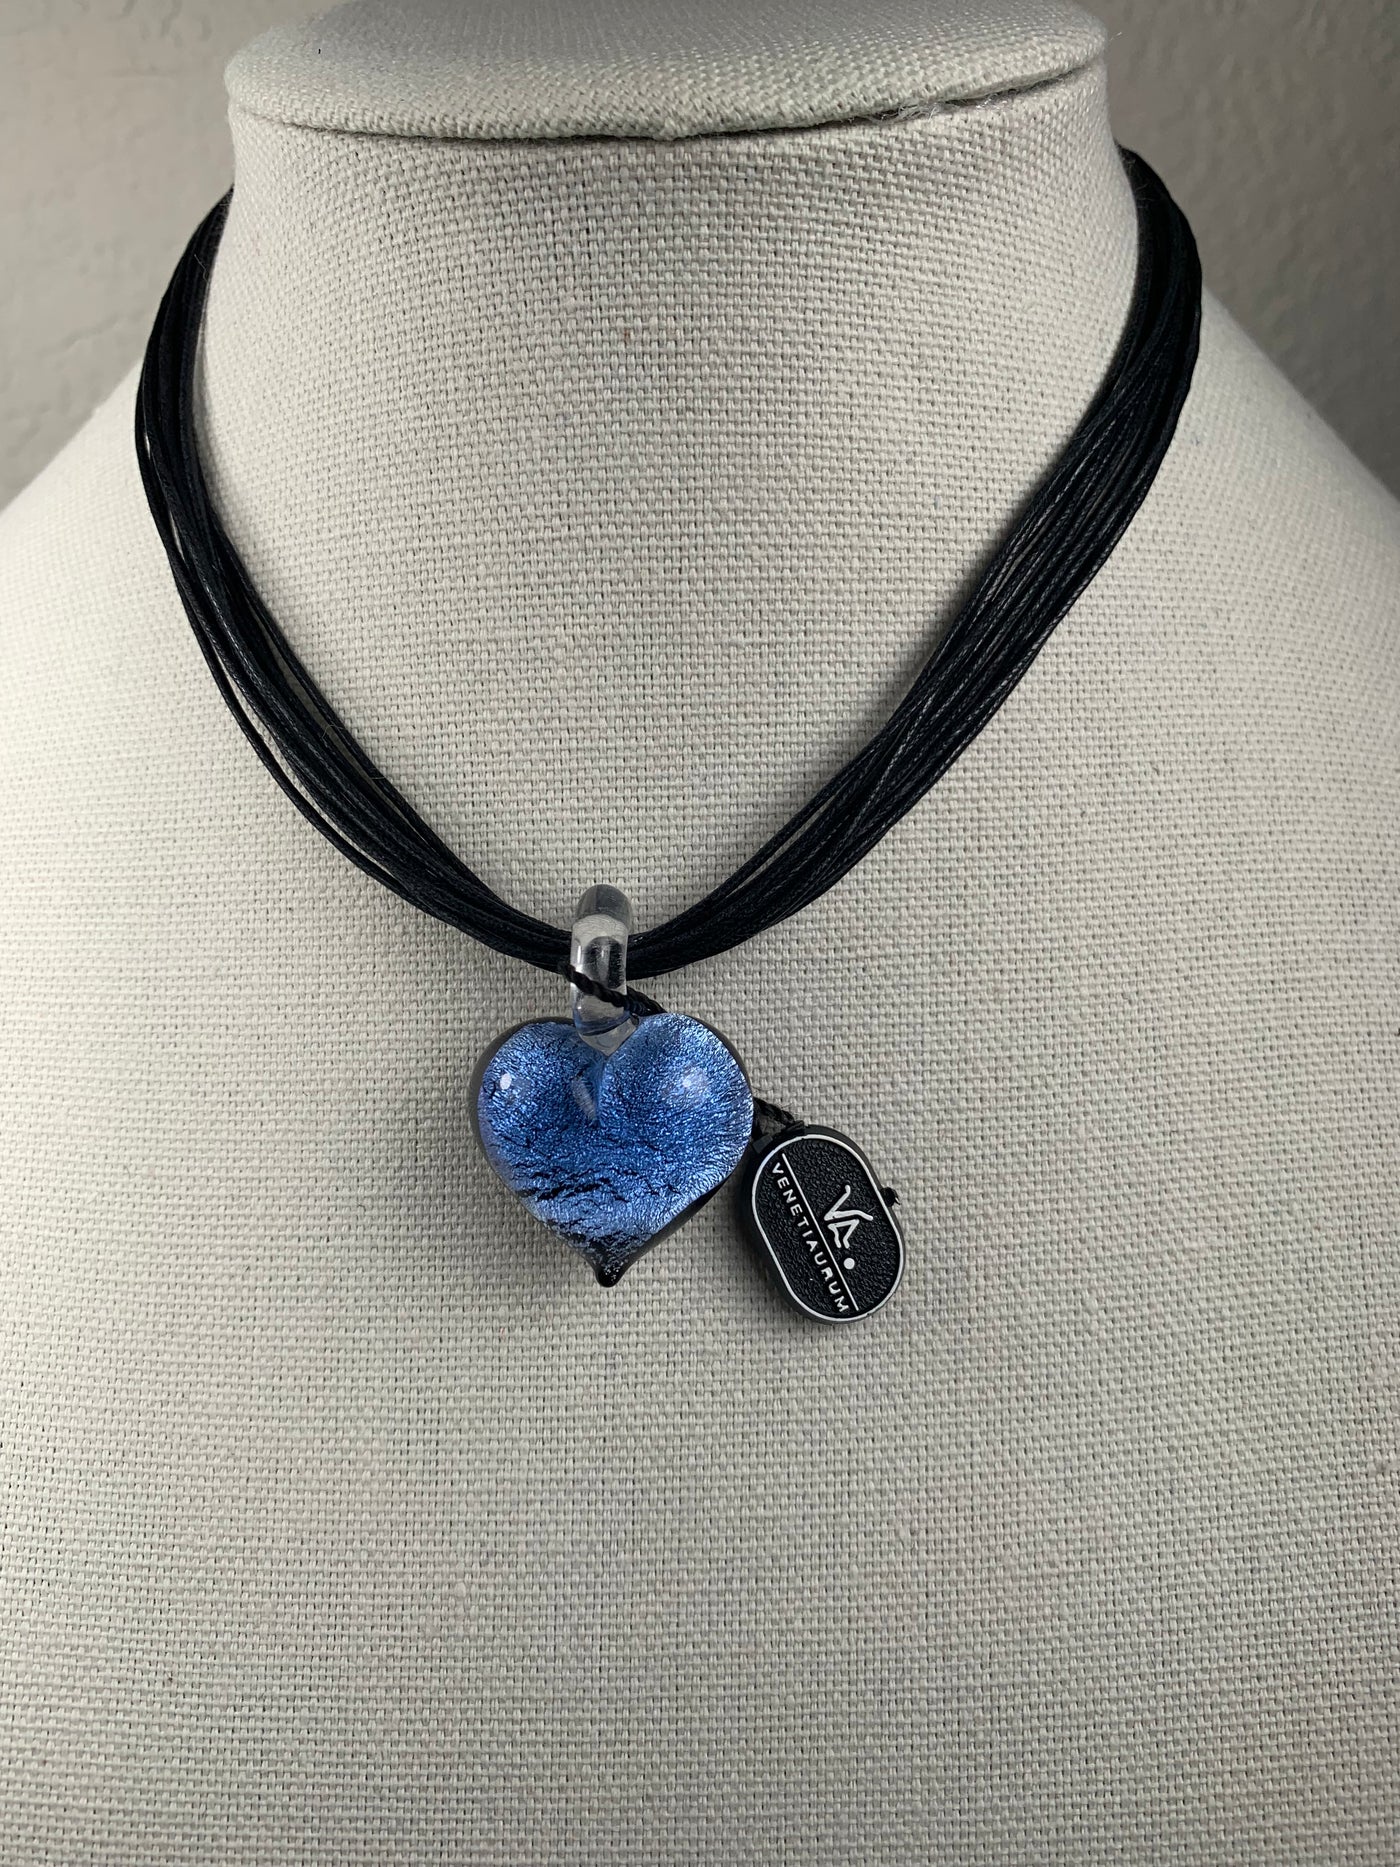 Blue Murano Glass Puffy Heart Pendant from Italy